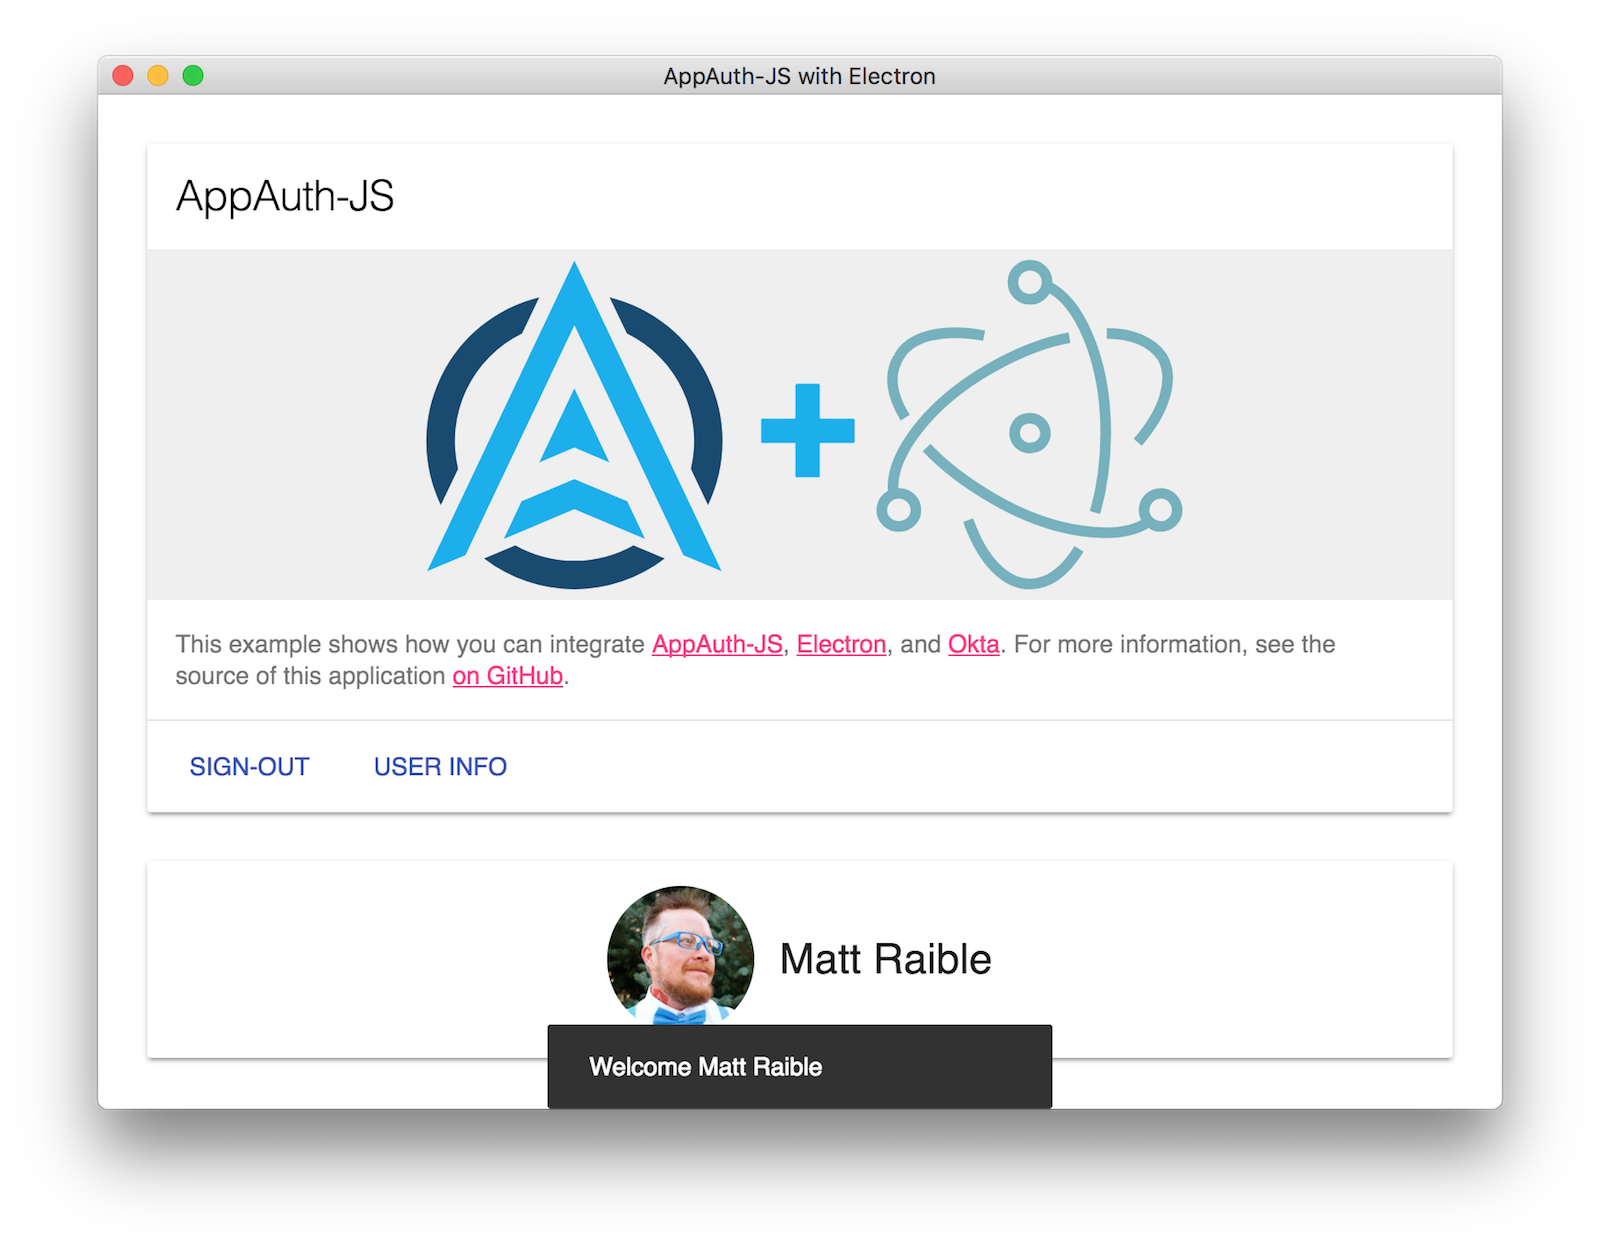 Build a Desktop App with Electron and Authentication